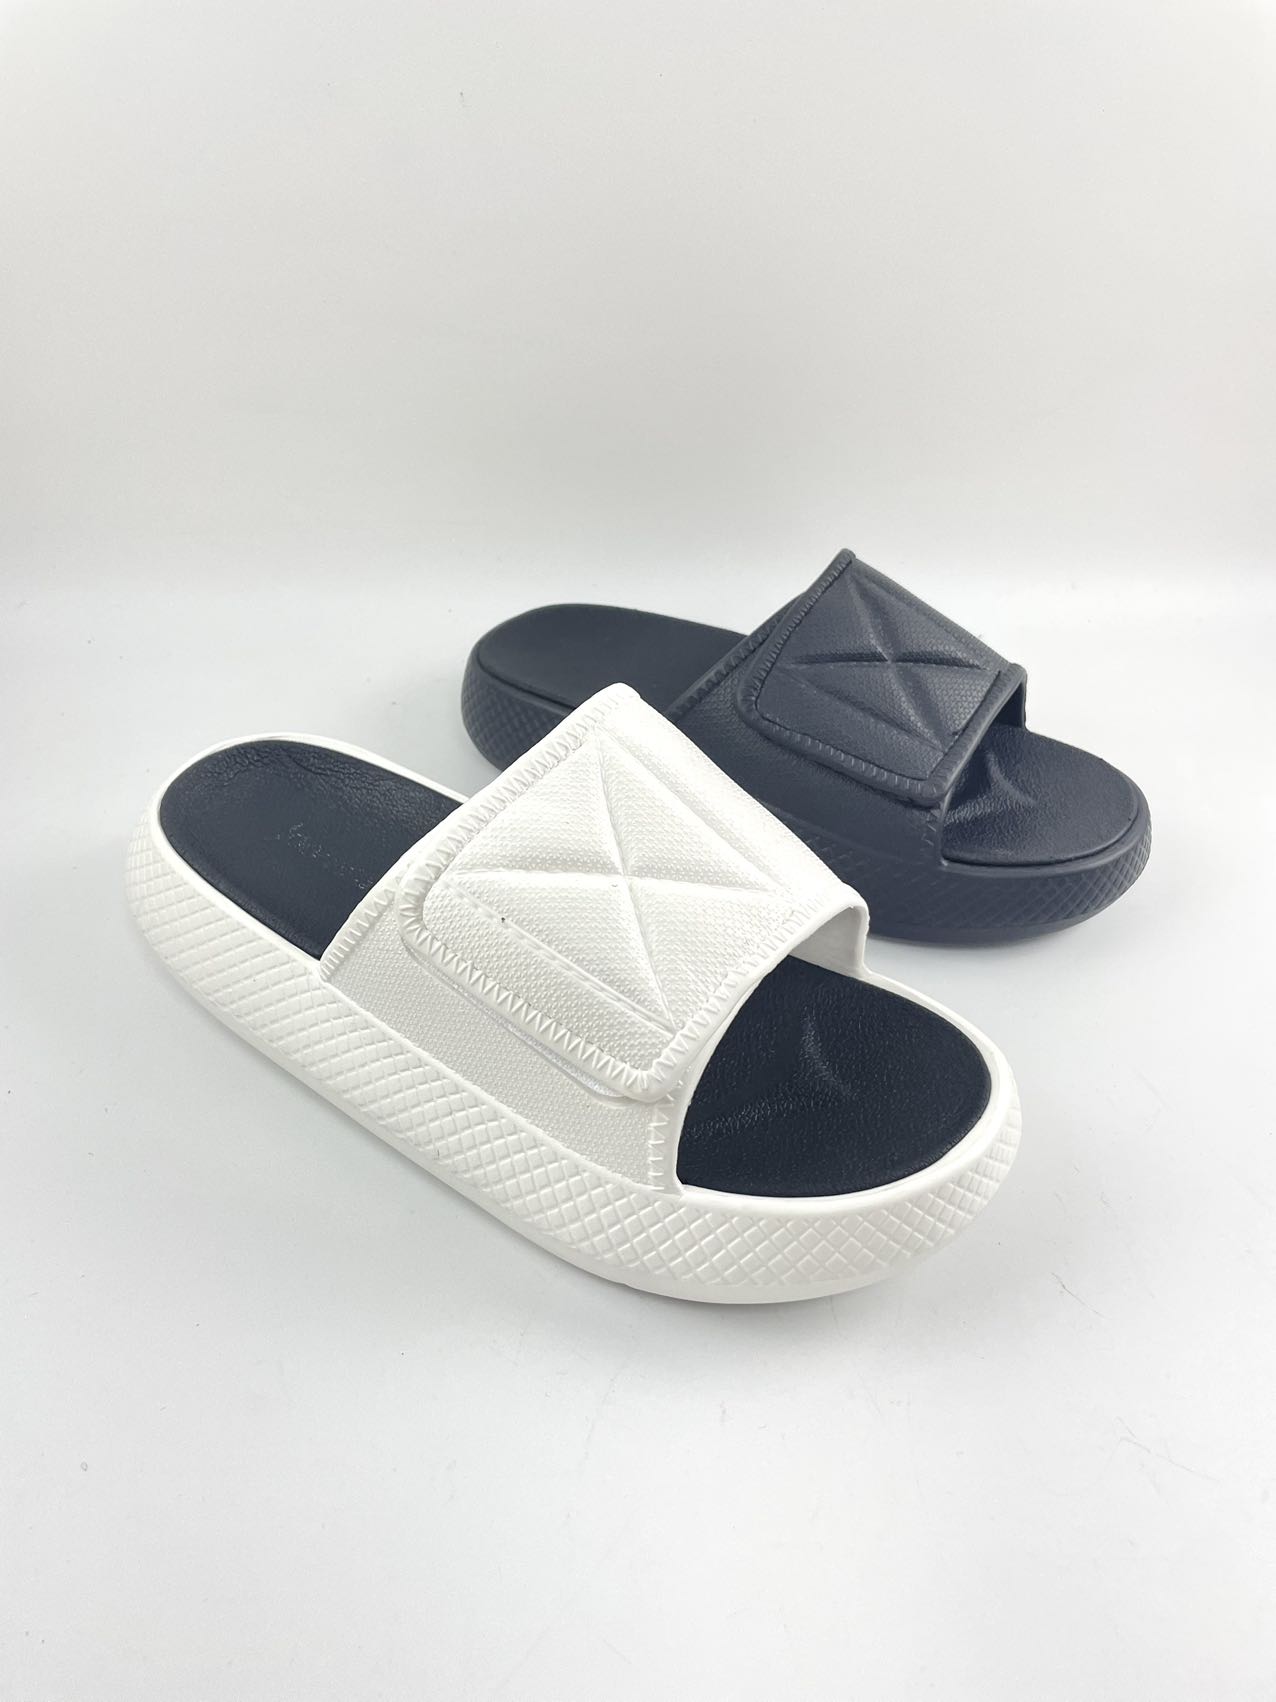 Thick Sole Premium Quality Cushion Slide Adjustable Velcro Slipper with Super Soft and Bouncy Soles